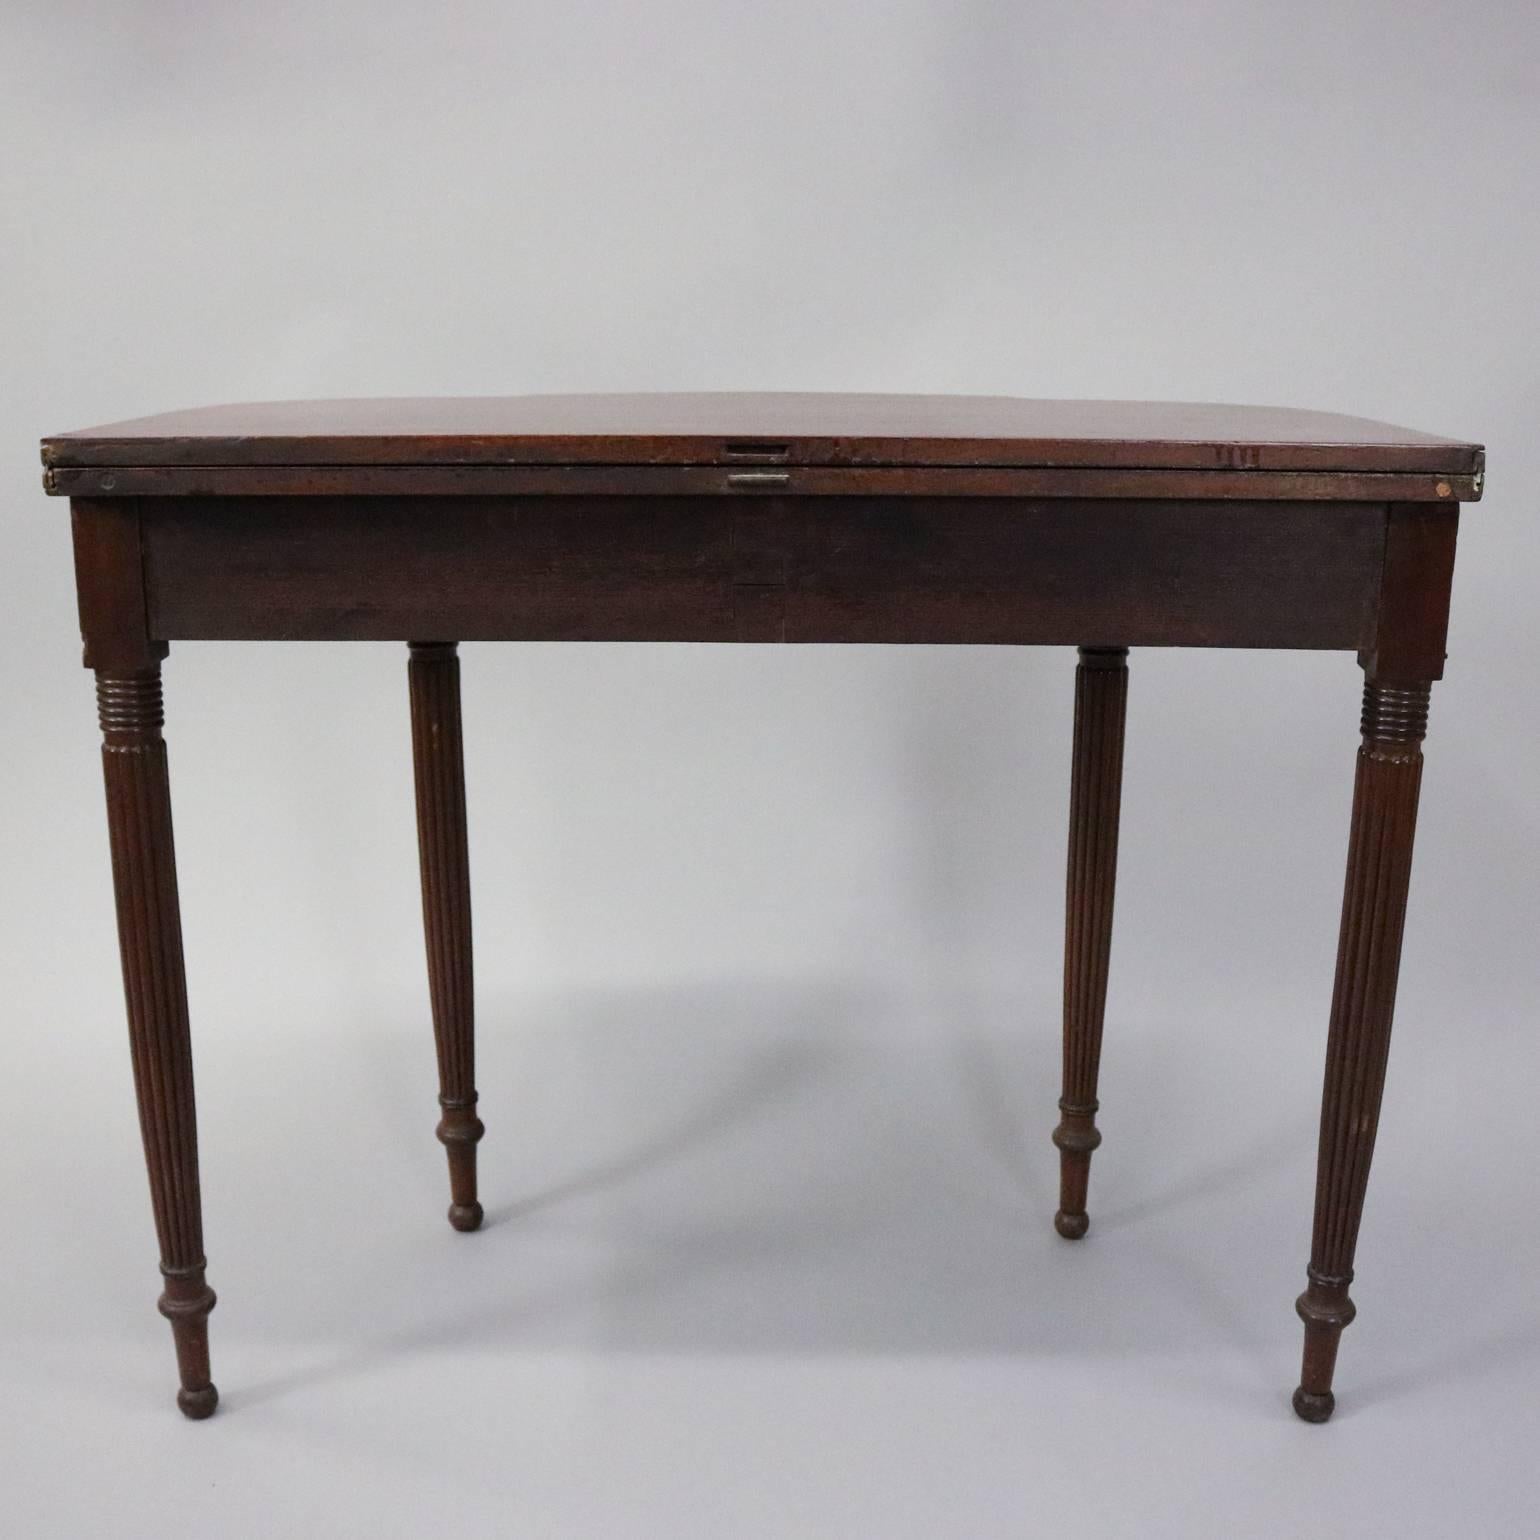 American Antique Sheraton Carved Mahogany Game Table, Acanthus Decorated, circa 1830